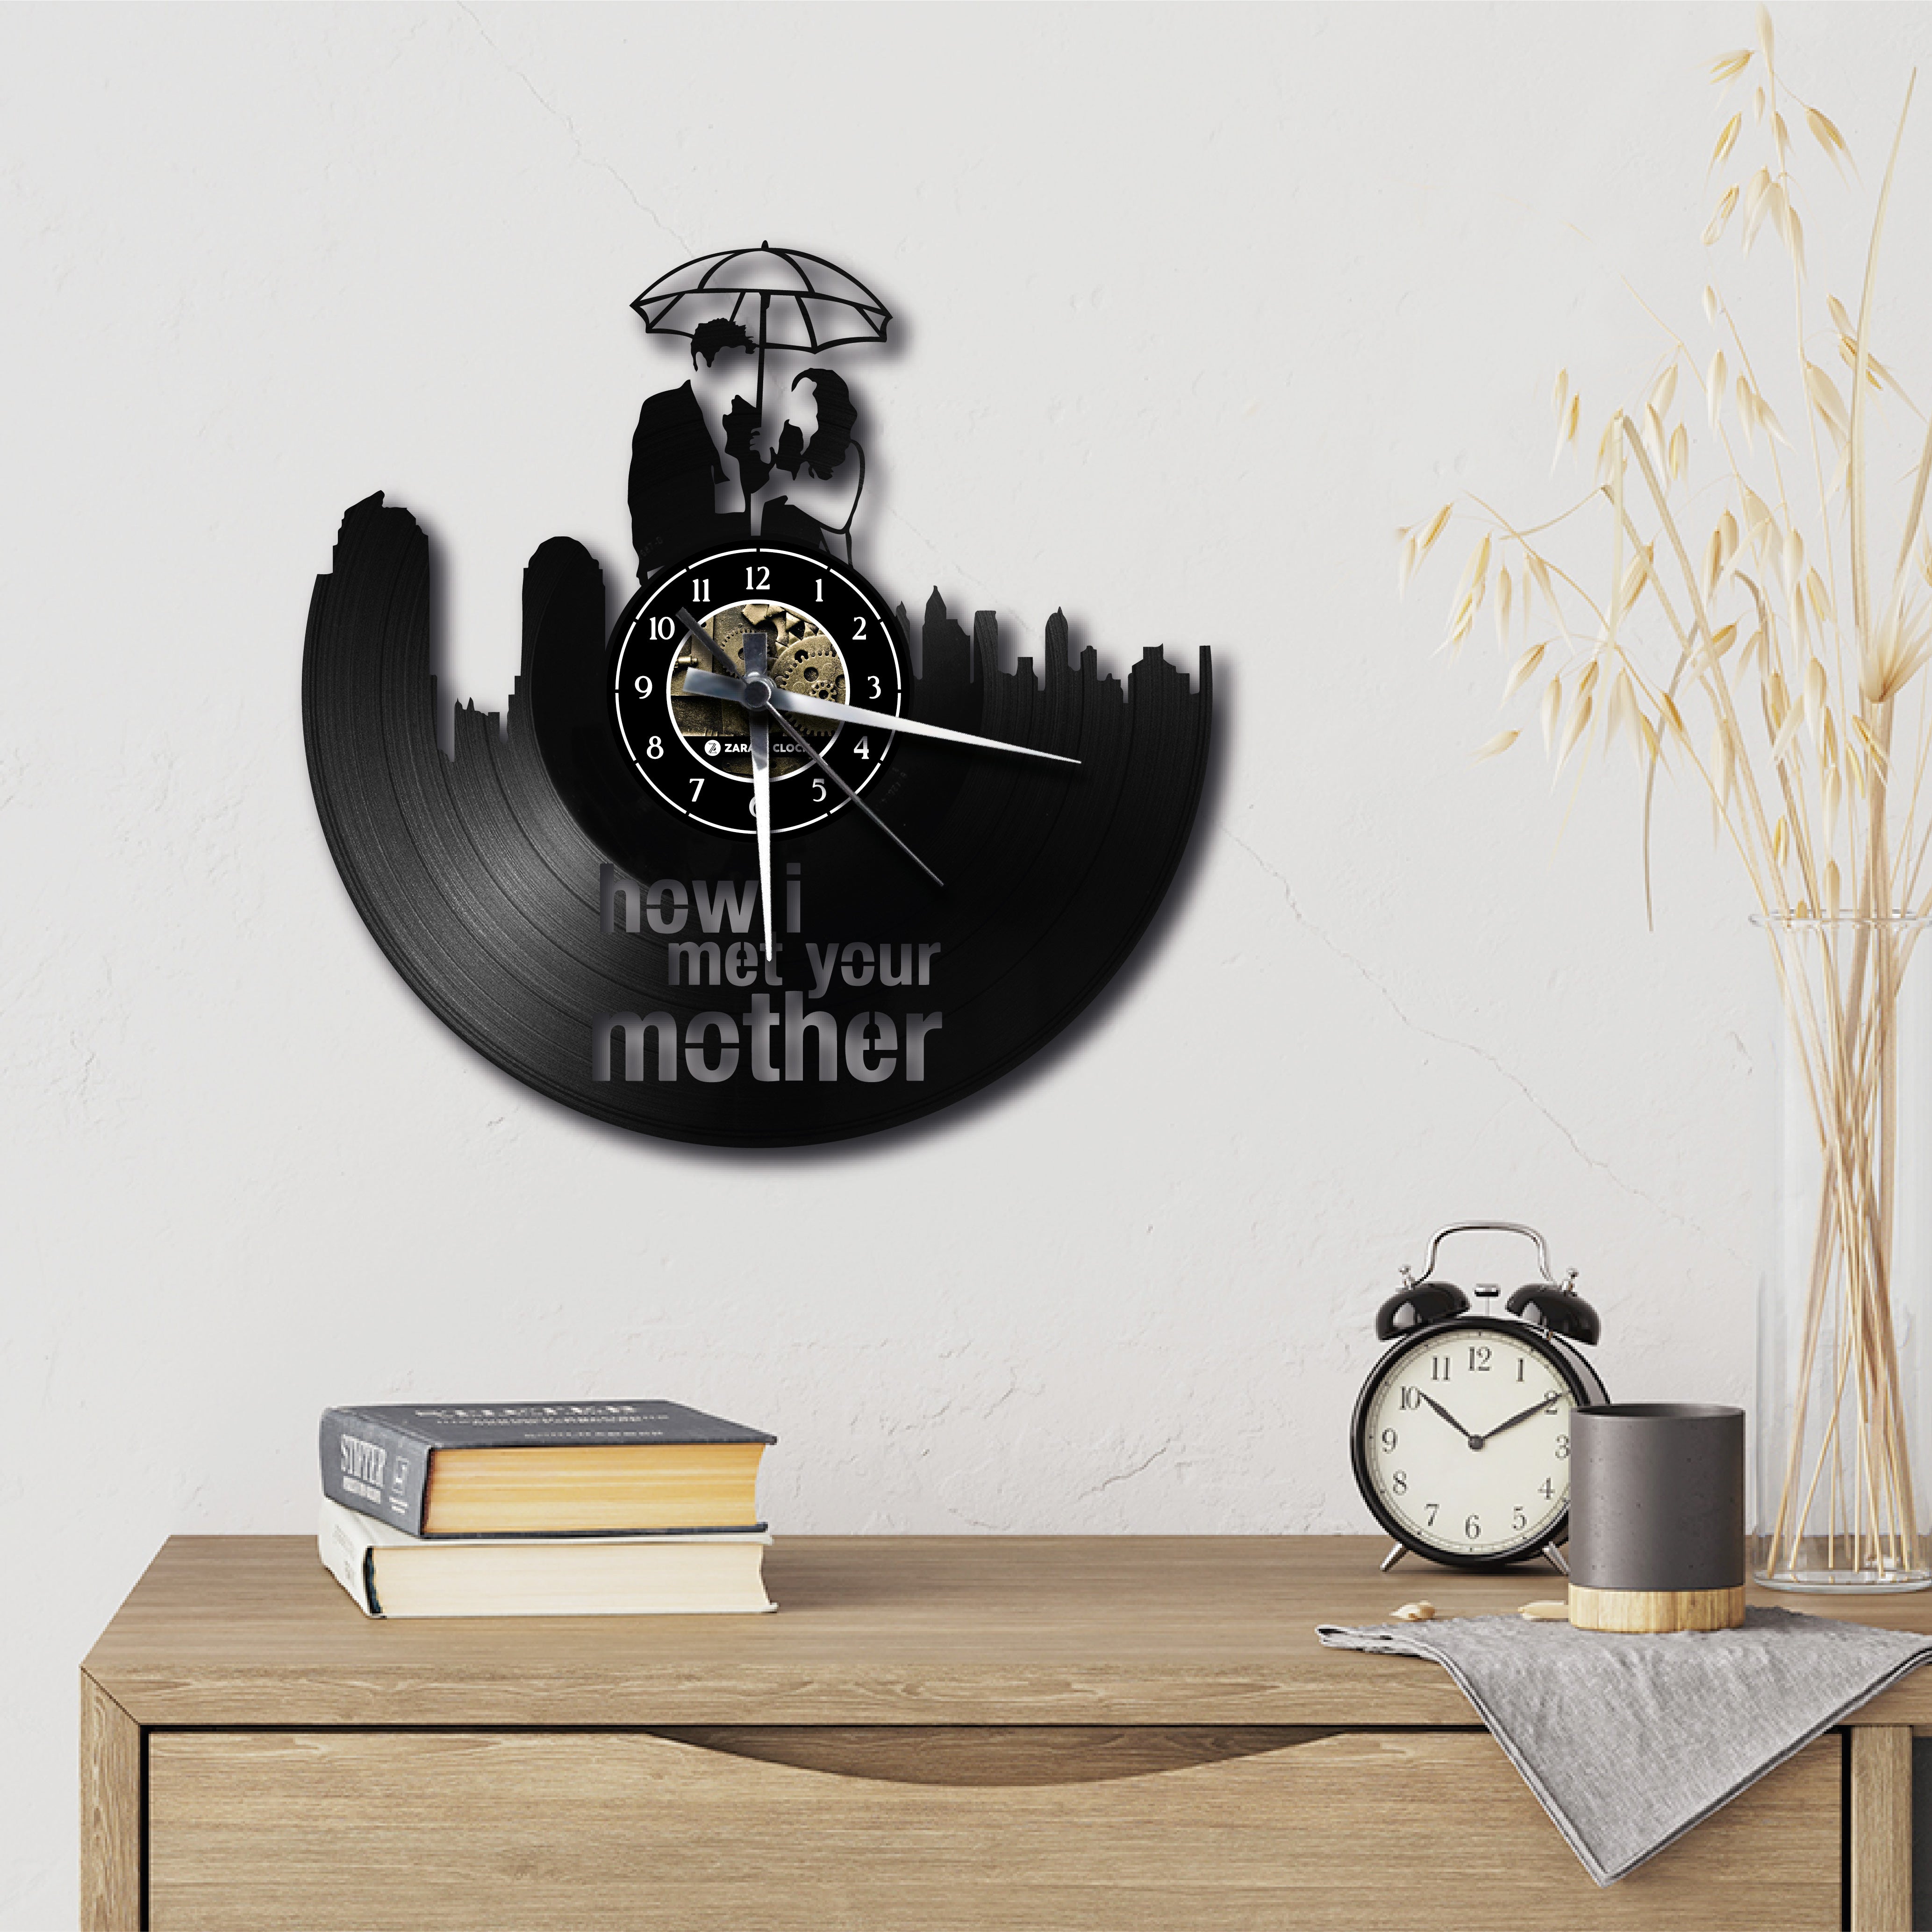 HOW I MET YOUR MOTHER ✦ orologio in vinile